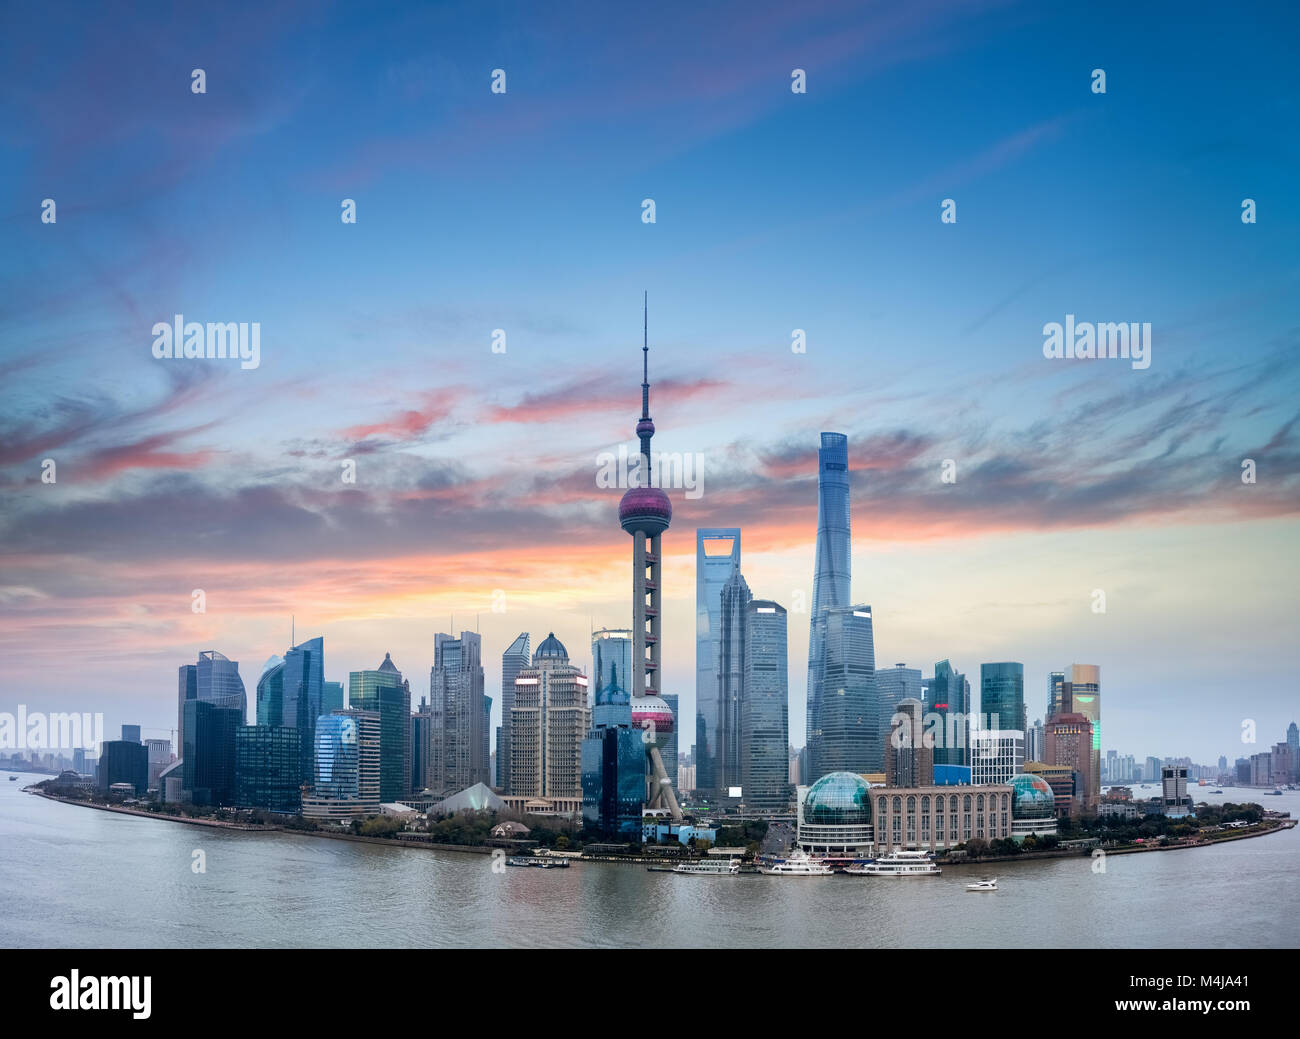 shanghai skyline with burning clouds Stock Photo